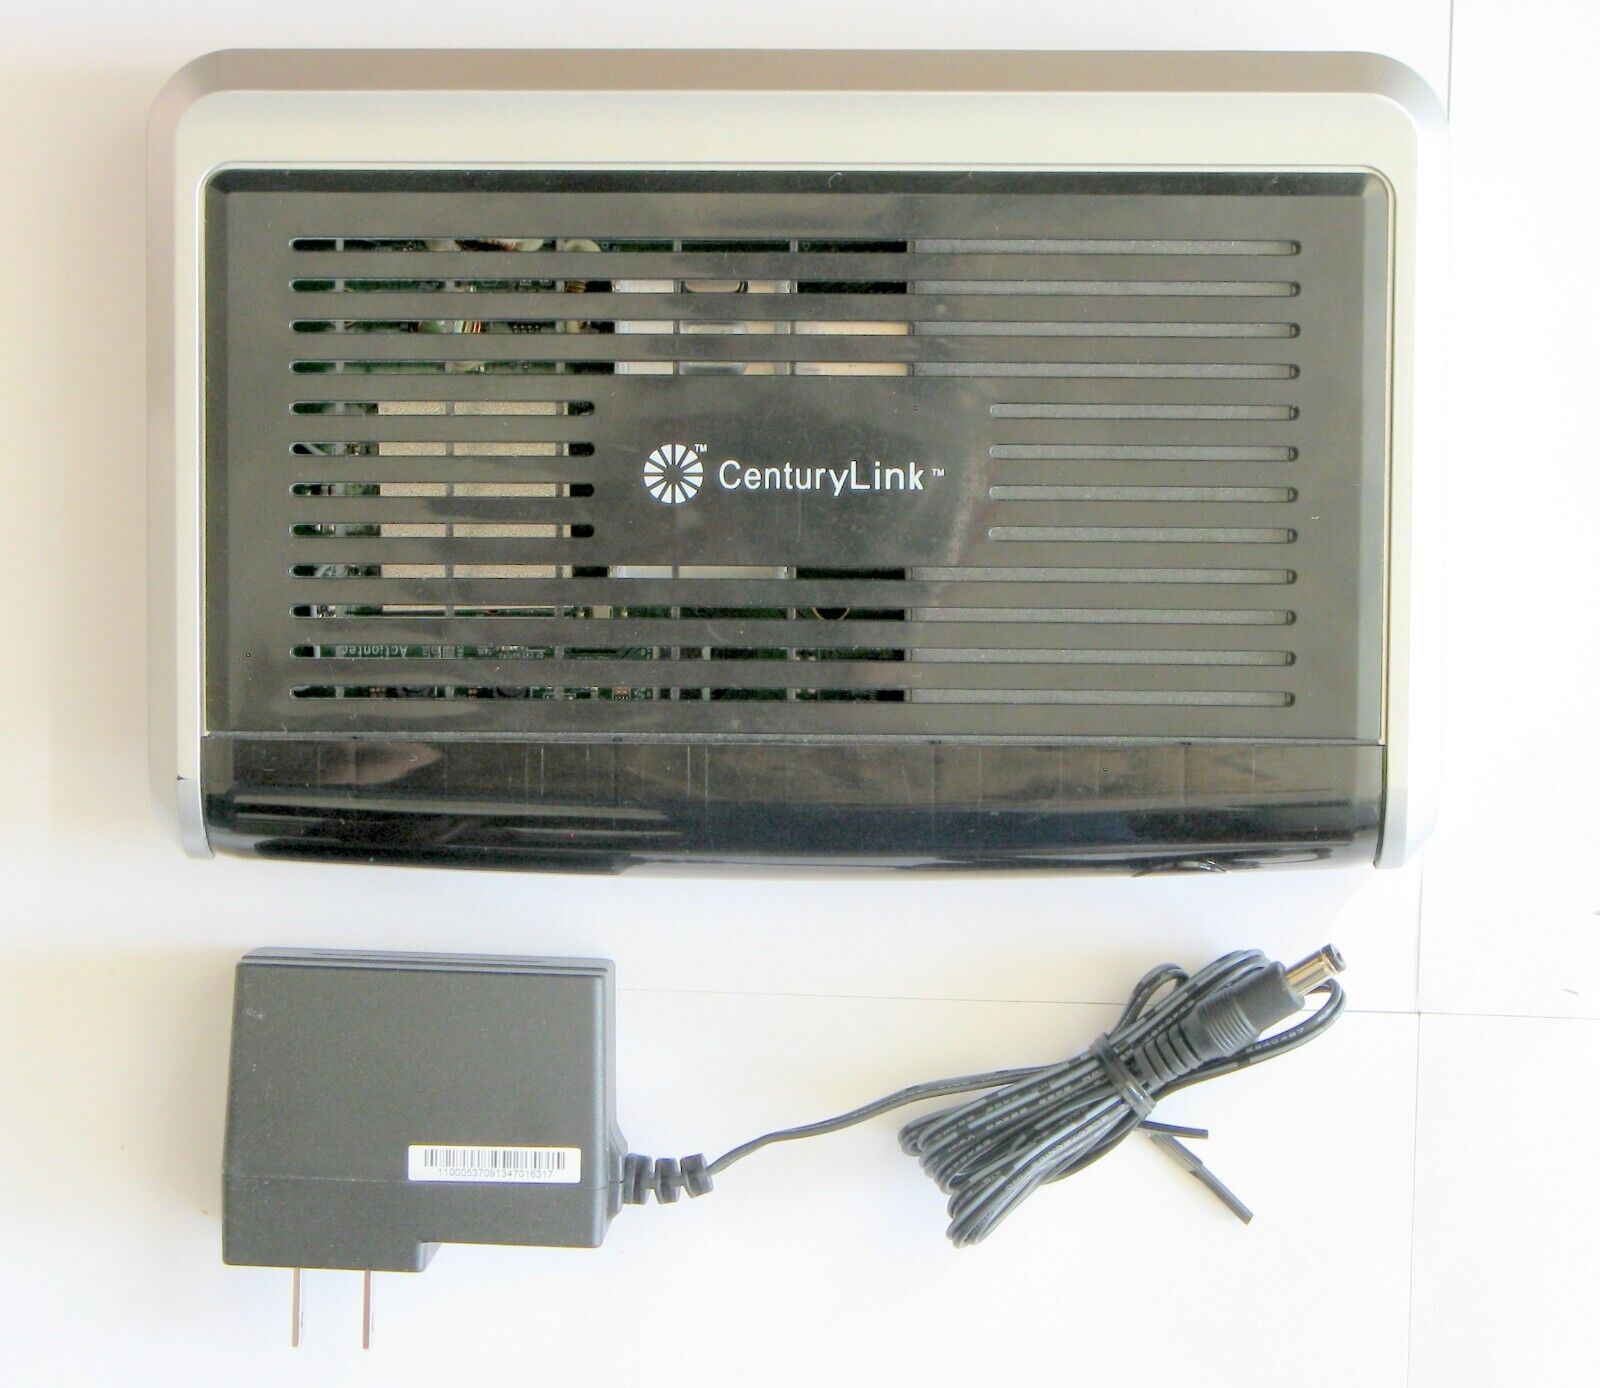 ActionTec CenturyLink C1000A-D Wireless DSL Modem/Router, 802.11n WiFi, TESTED